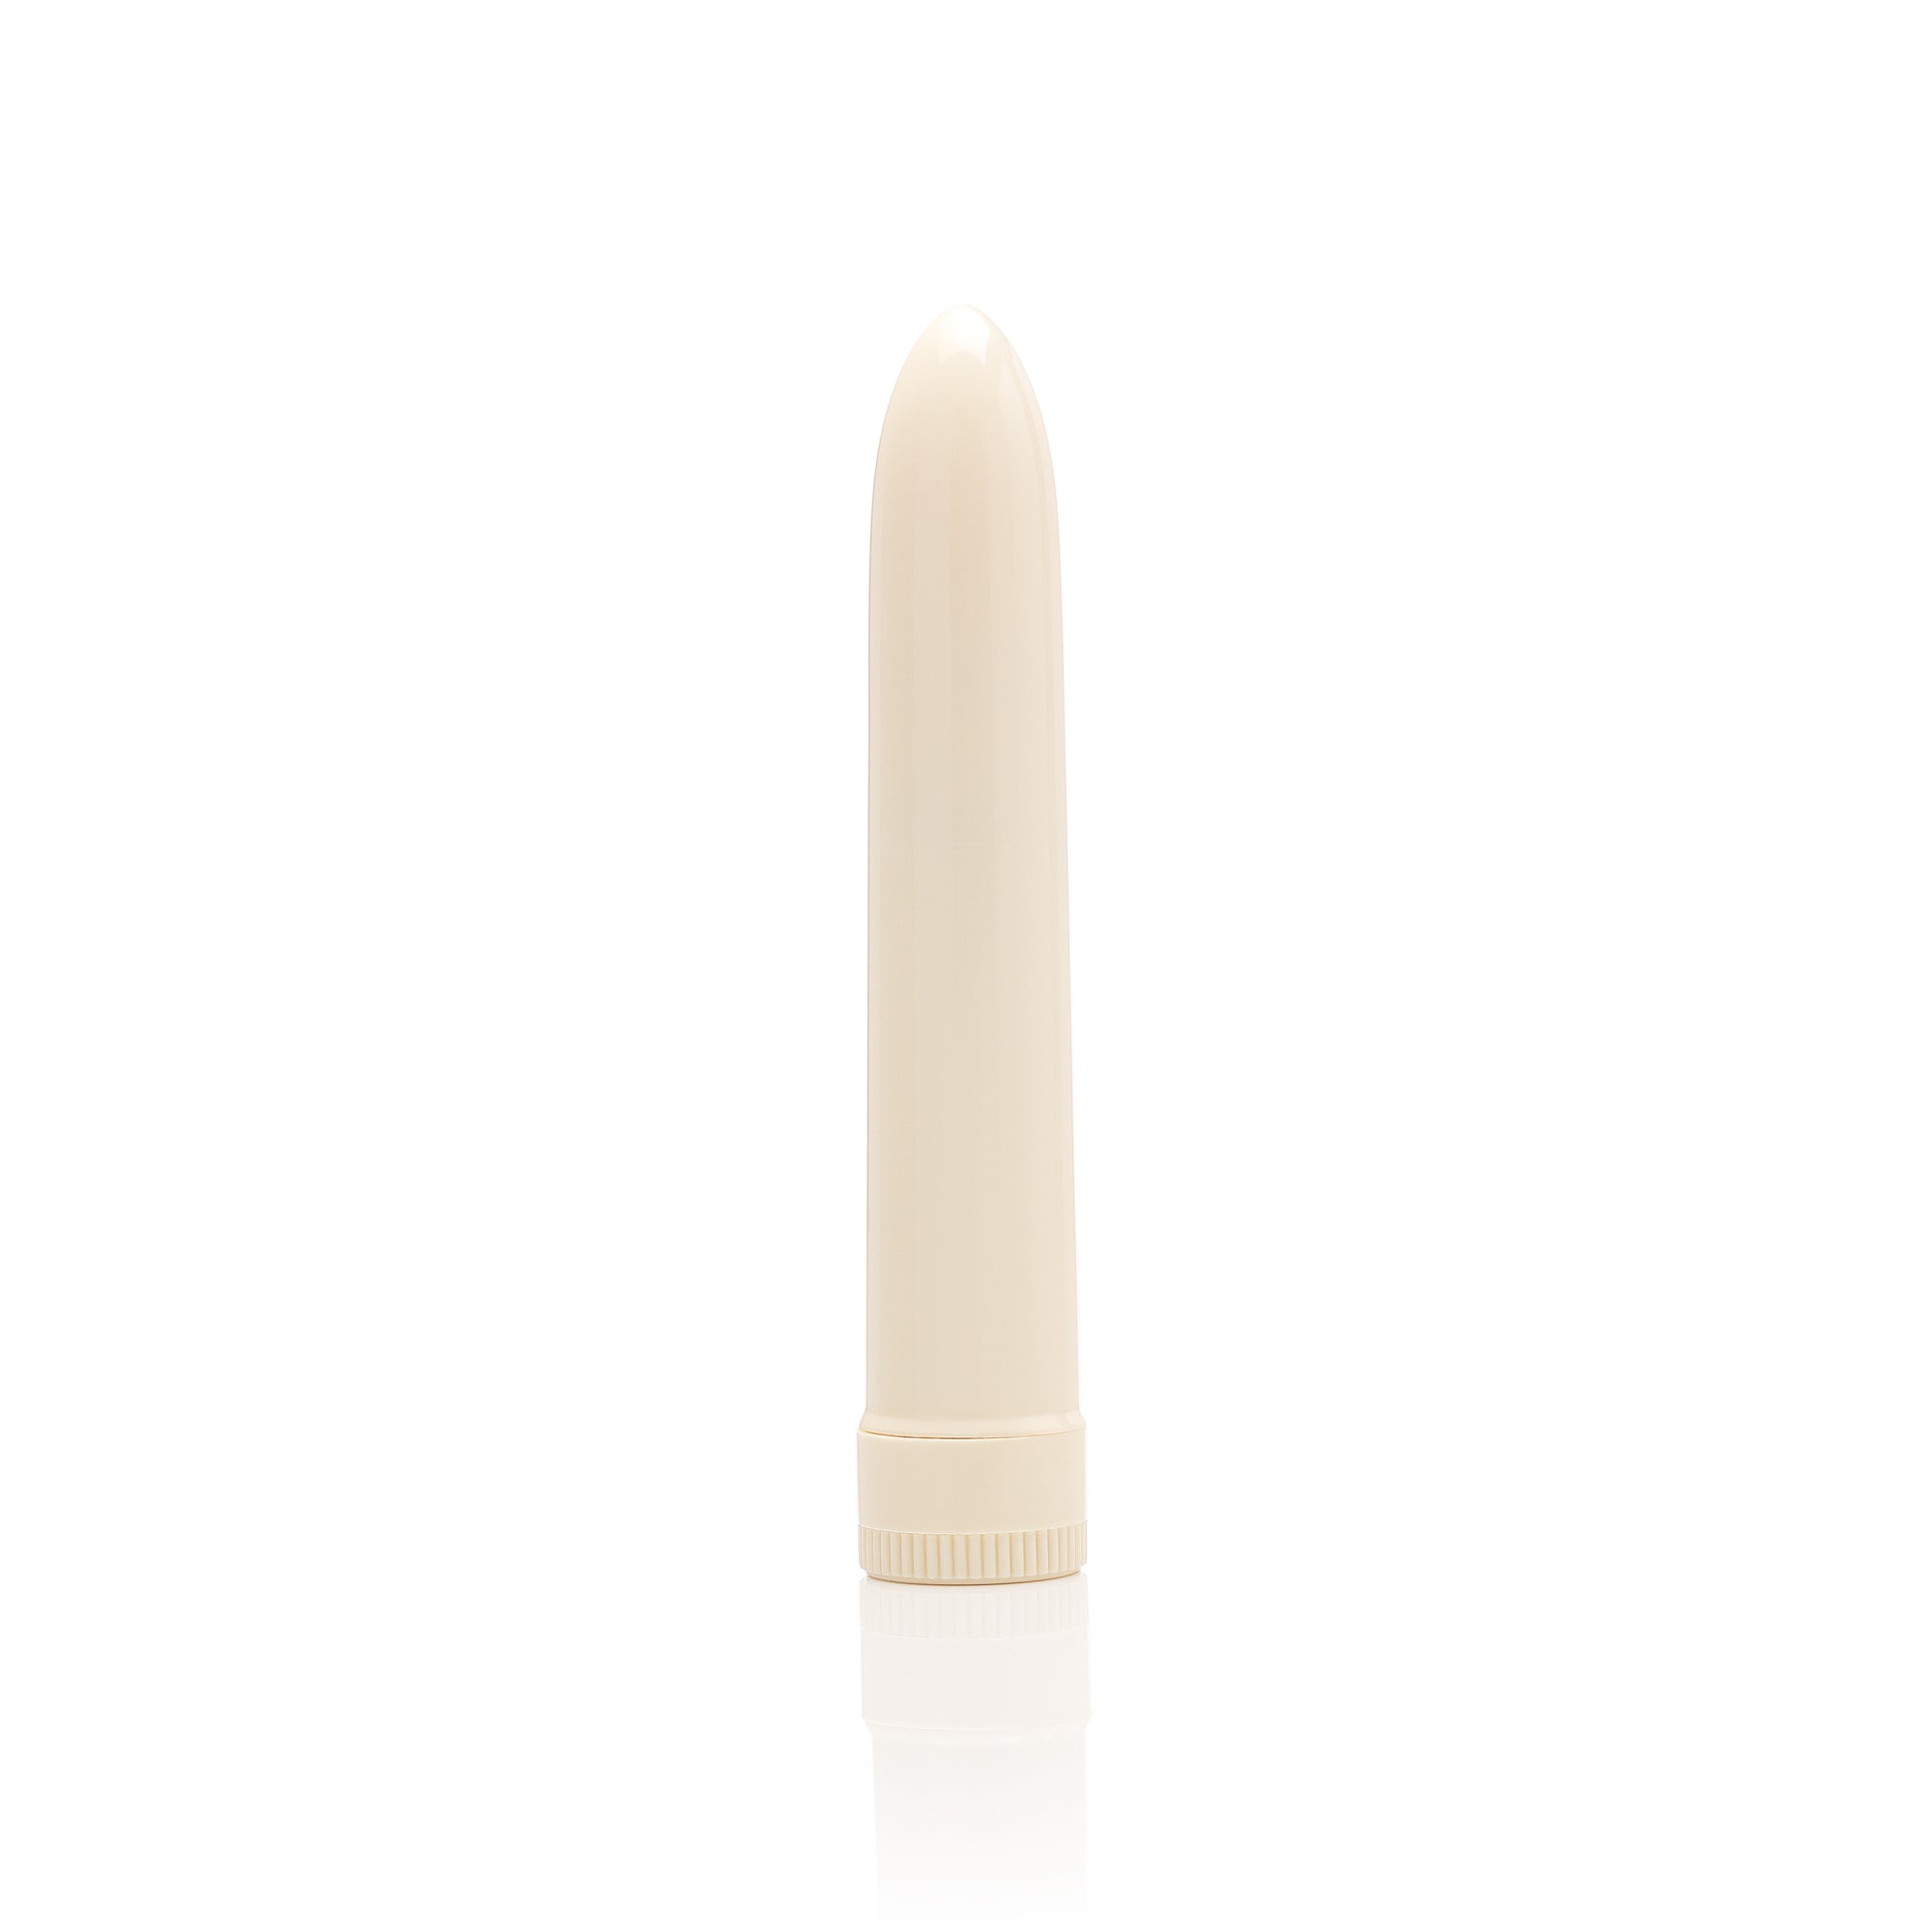 Clone-A-Willy Refill XL Vibrator